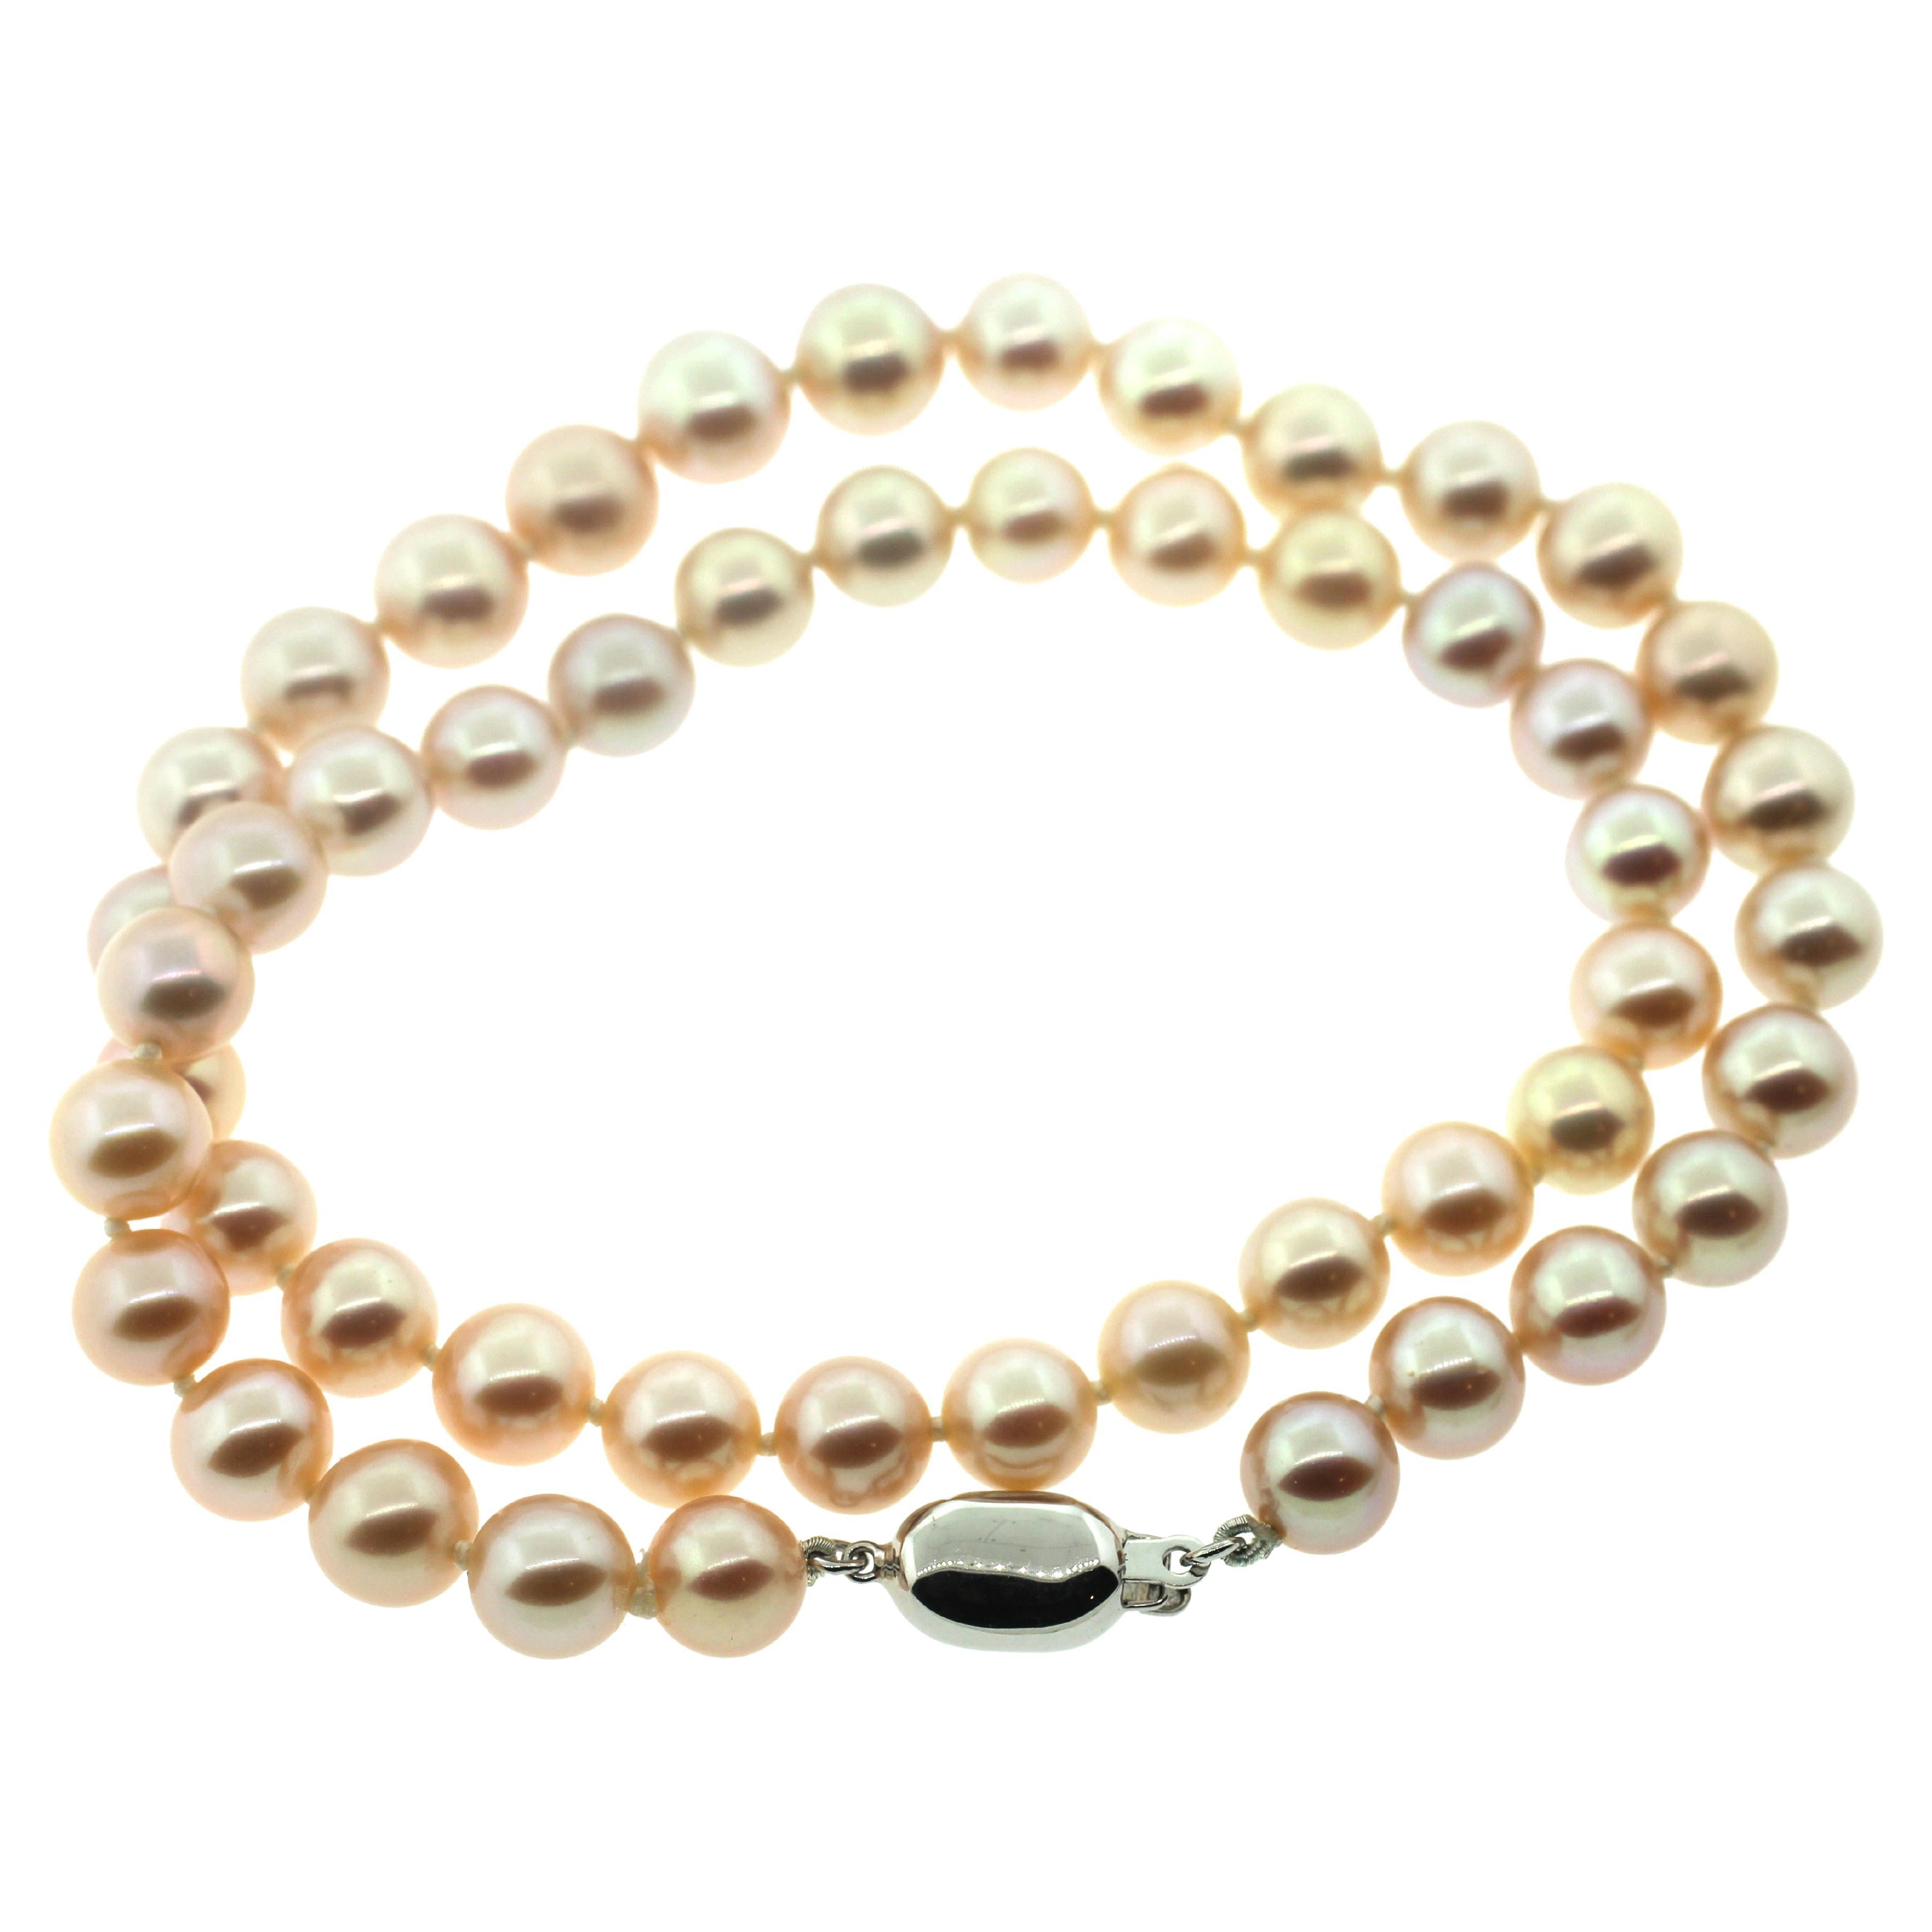 Hakimoto Pink Cultured Pearl Necklace
18K Clacp
17.5 inches
8-7mm